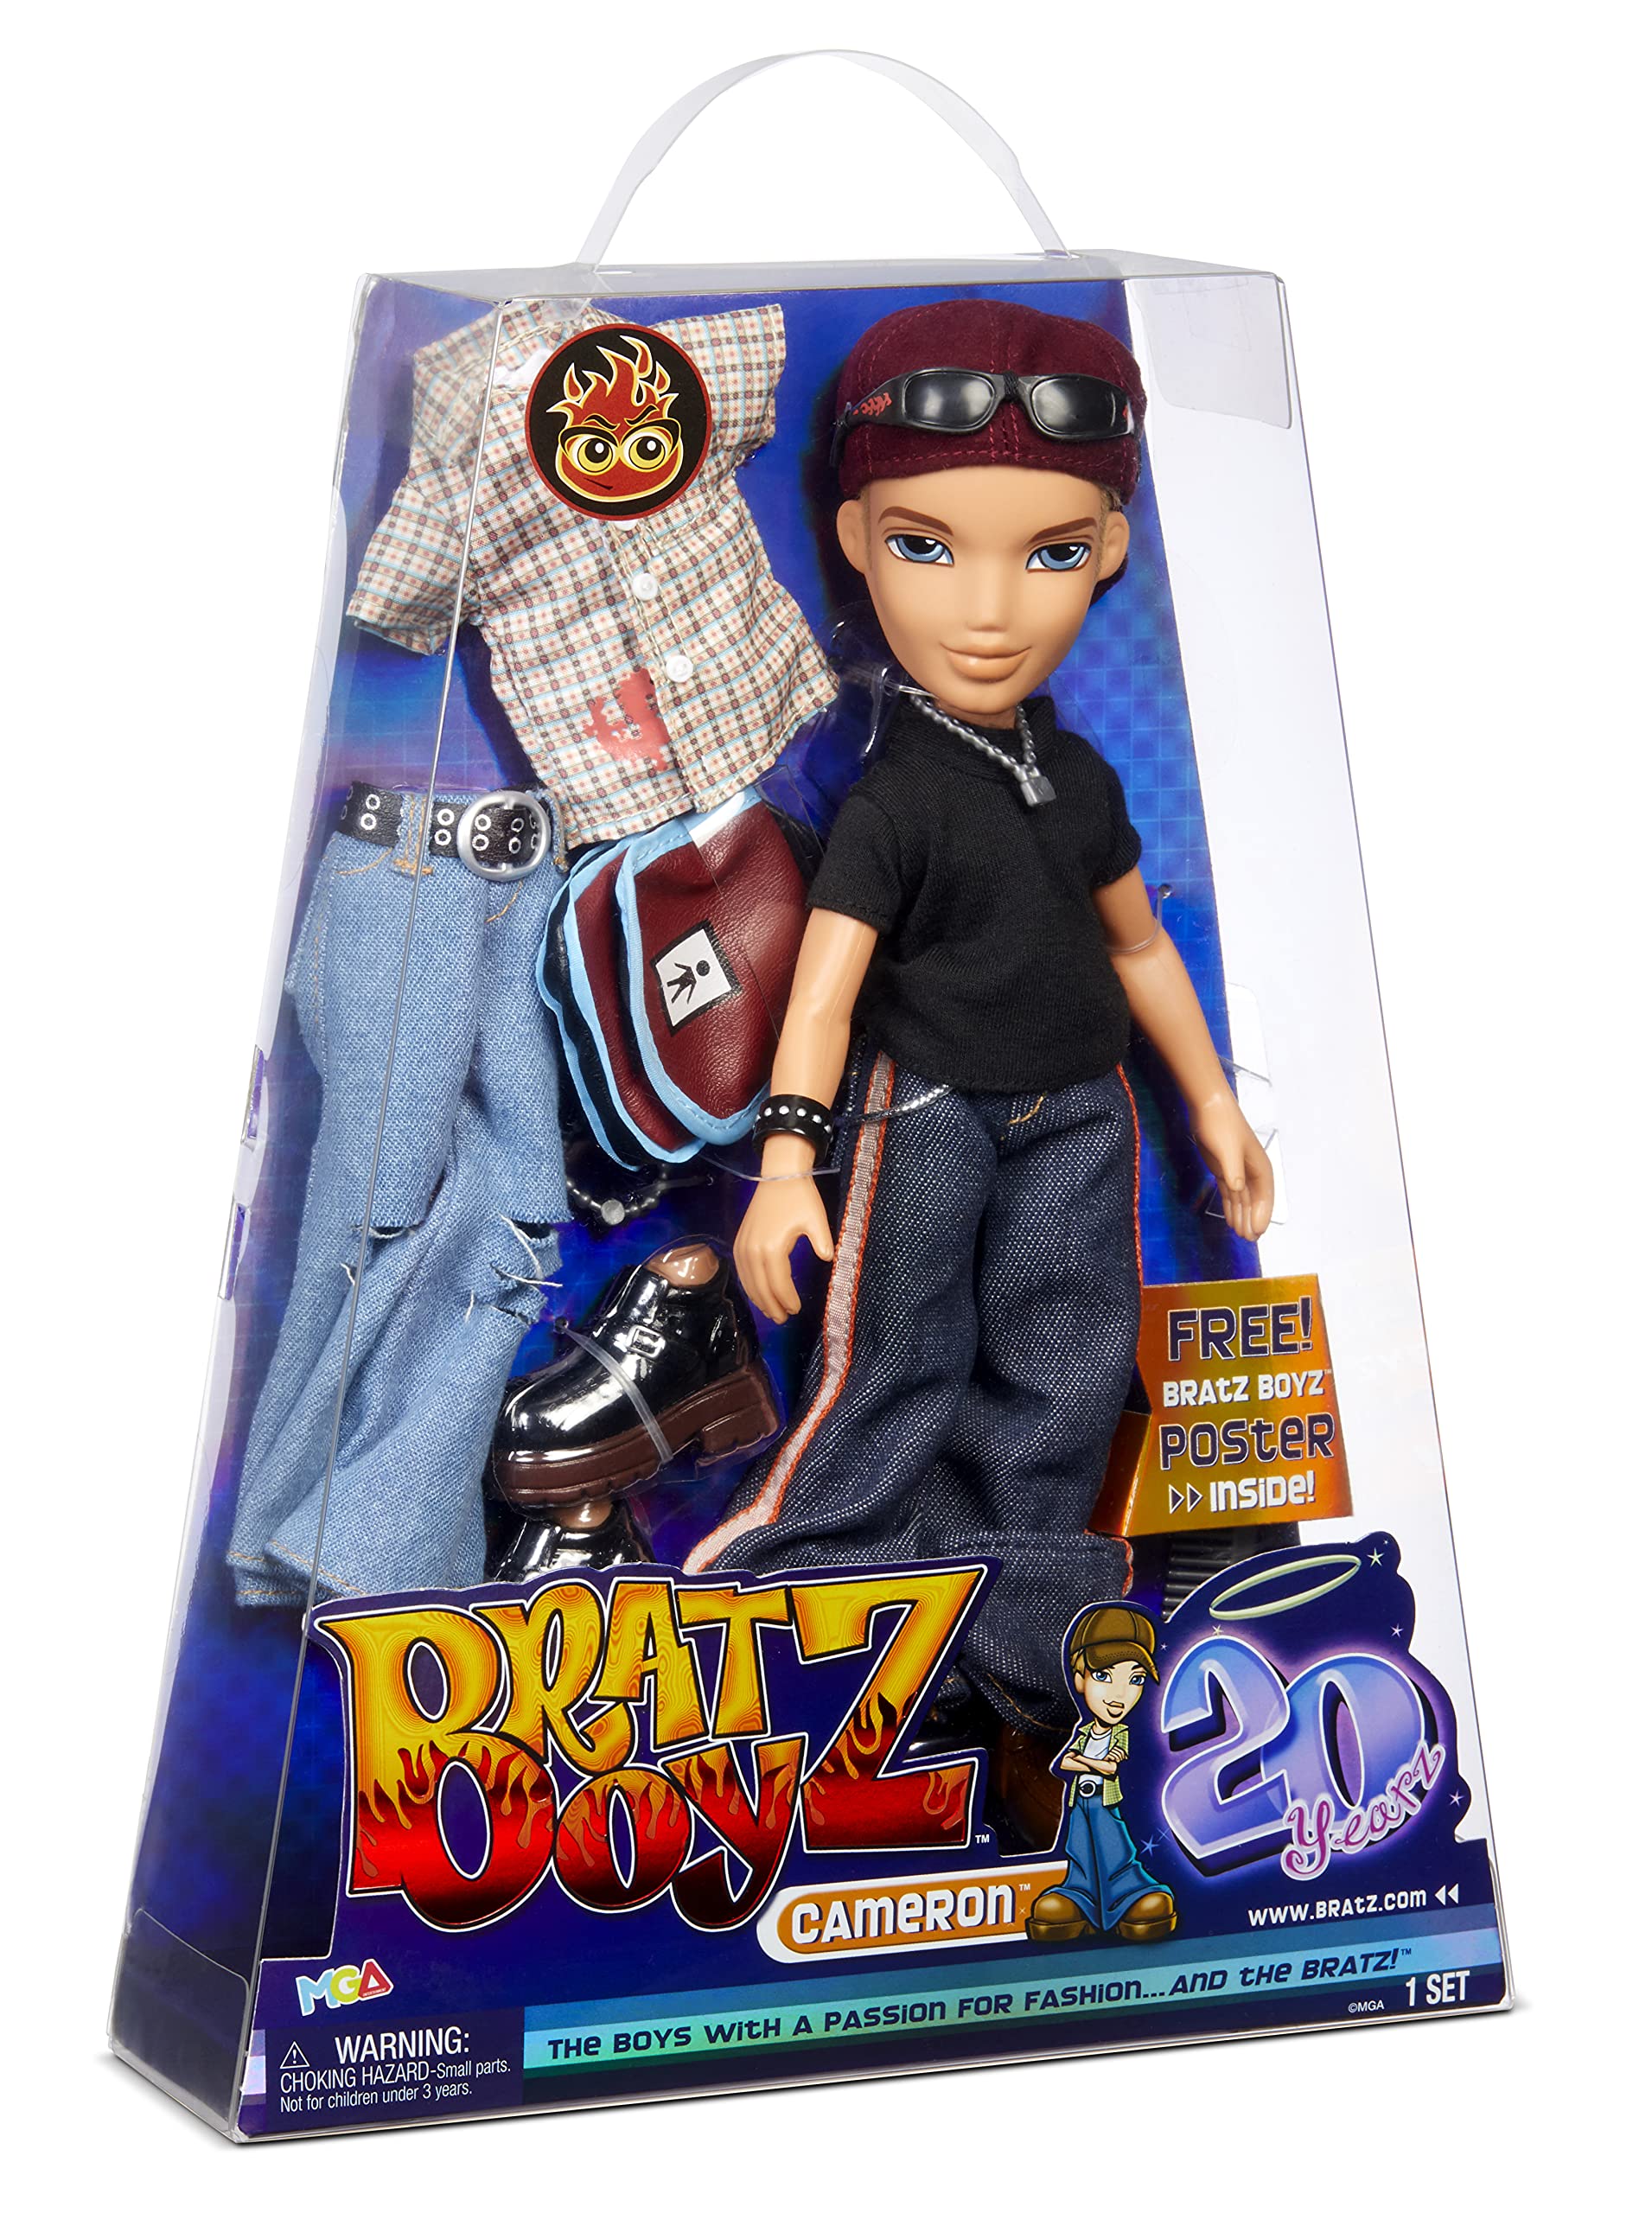 Bratz 20 Yearz Special Anniversary Edition Original Boy Fashion Cameron with Accessories and Holographic Poster | Collectible Doll | for Collector Adults and Kids of All Ages